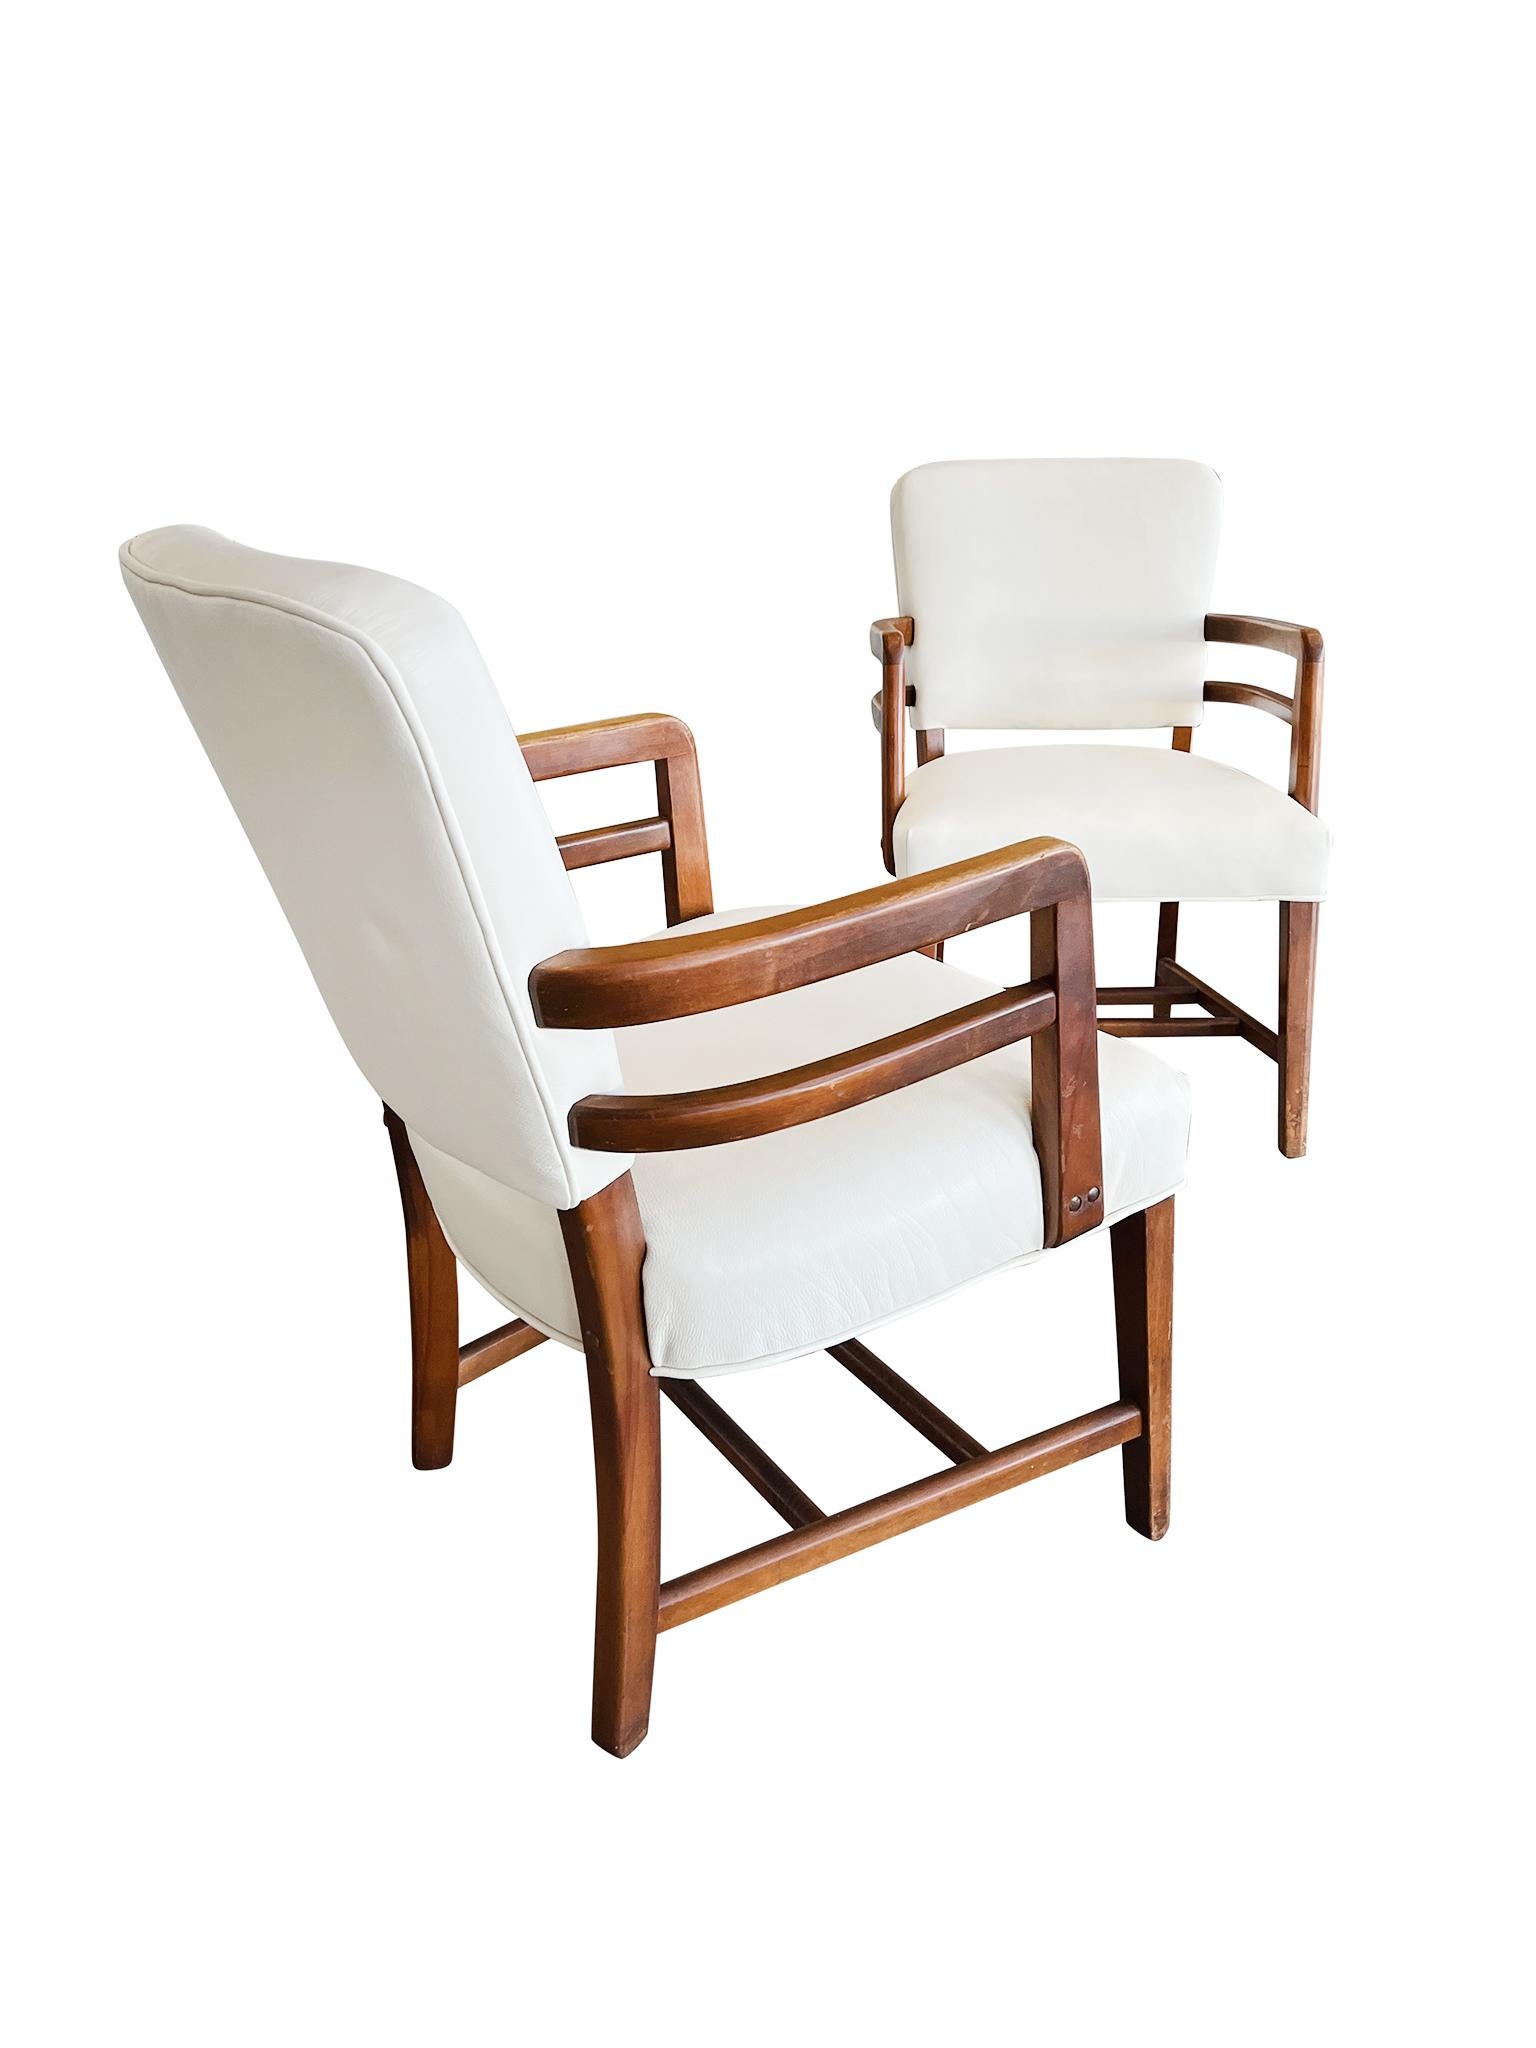 Exquisite pair of English Art Deco armchairs, crafted in the 1930s from beech wood. The chairs are newly reupholstered in oyster-white leather which beautifully complements the warm tones of the wood. The craftsmanship of the wood is noteworthy,